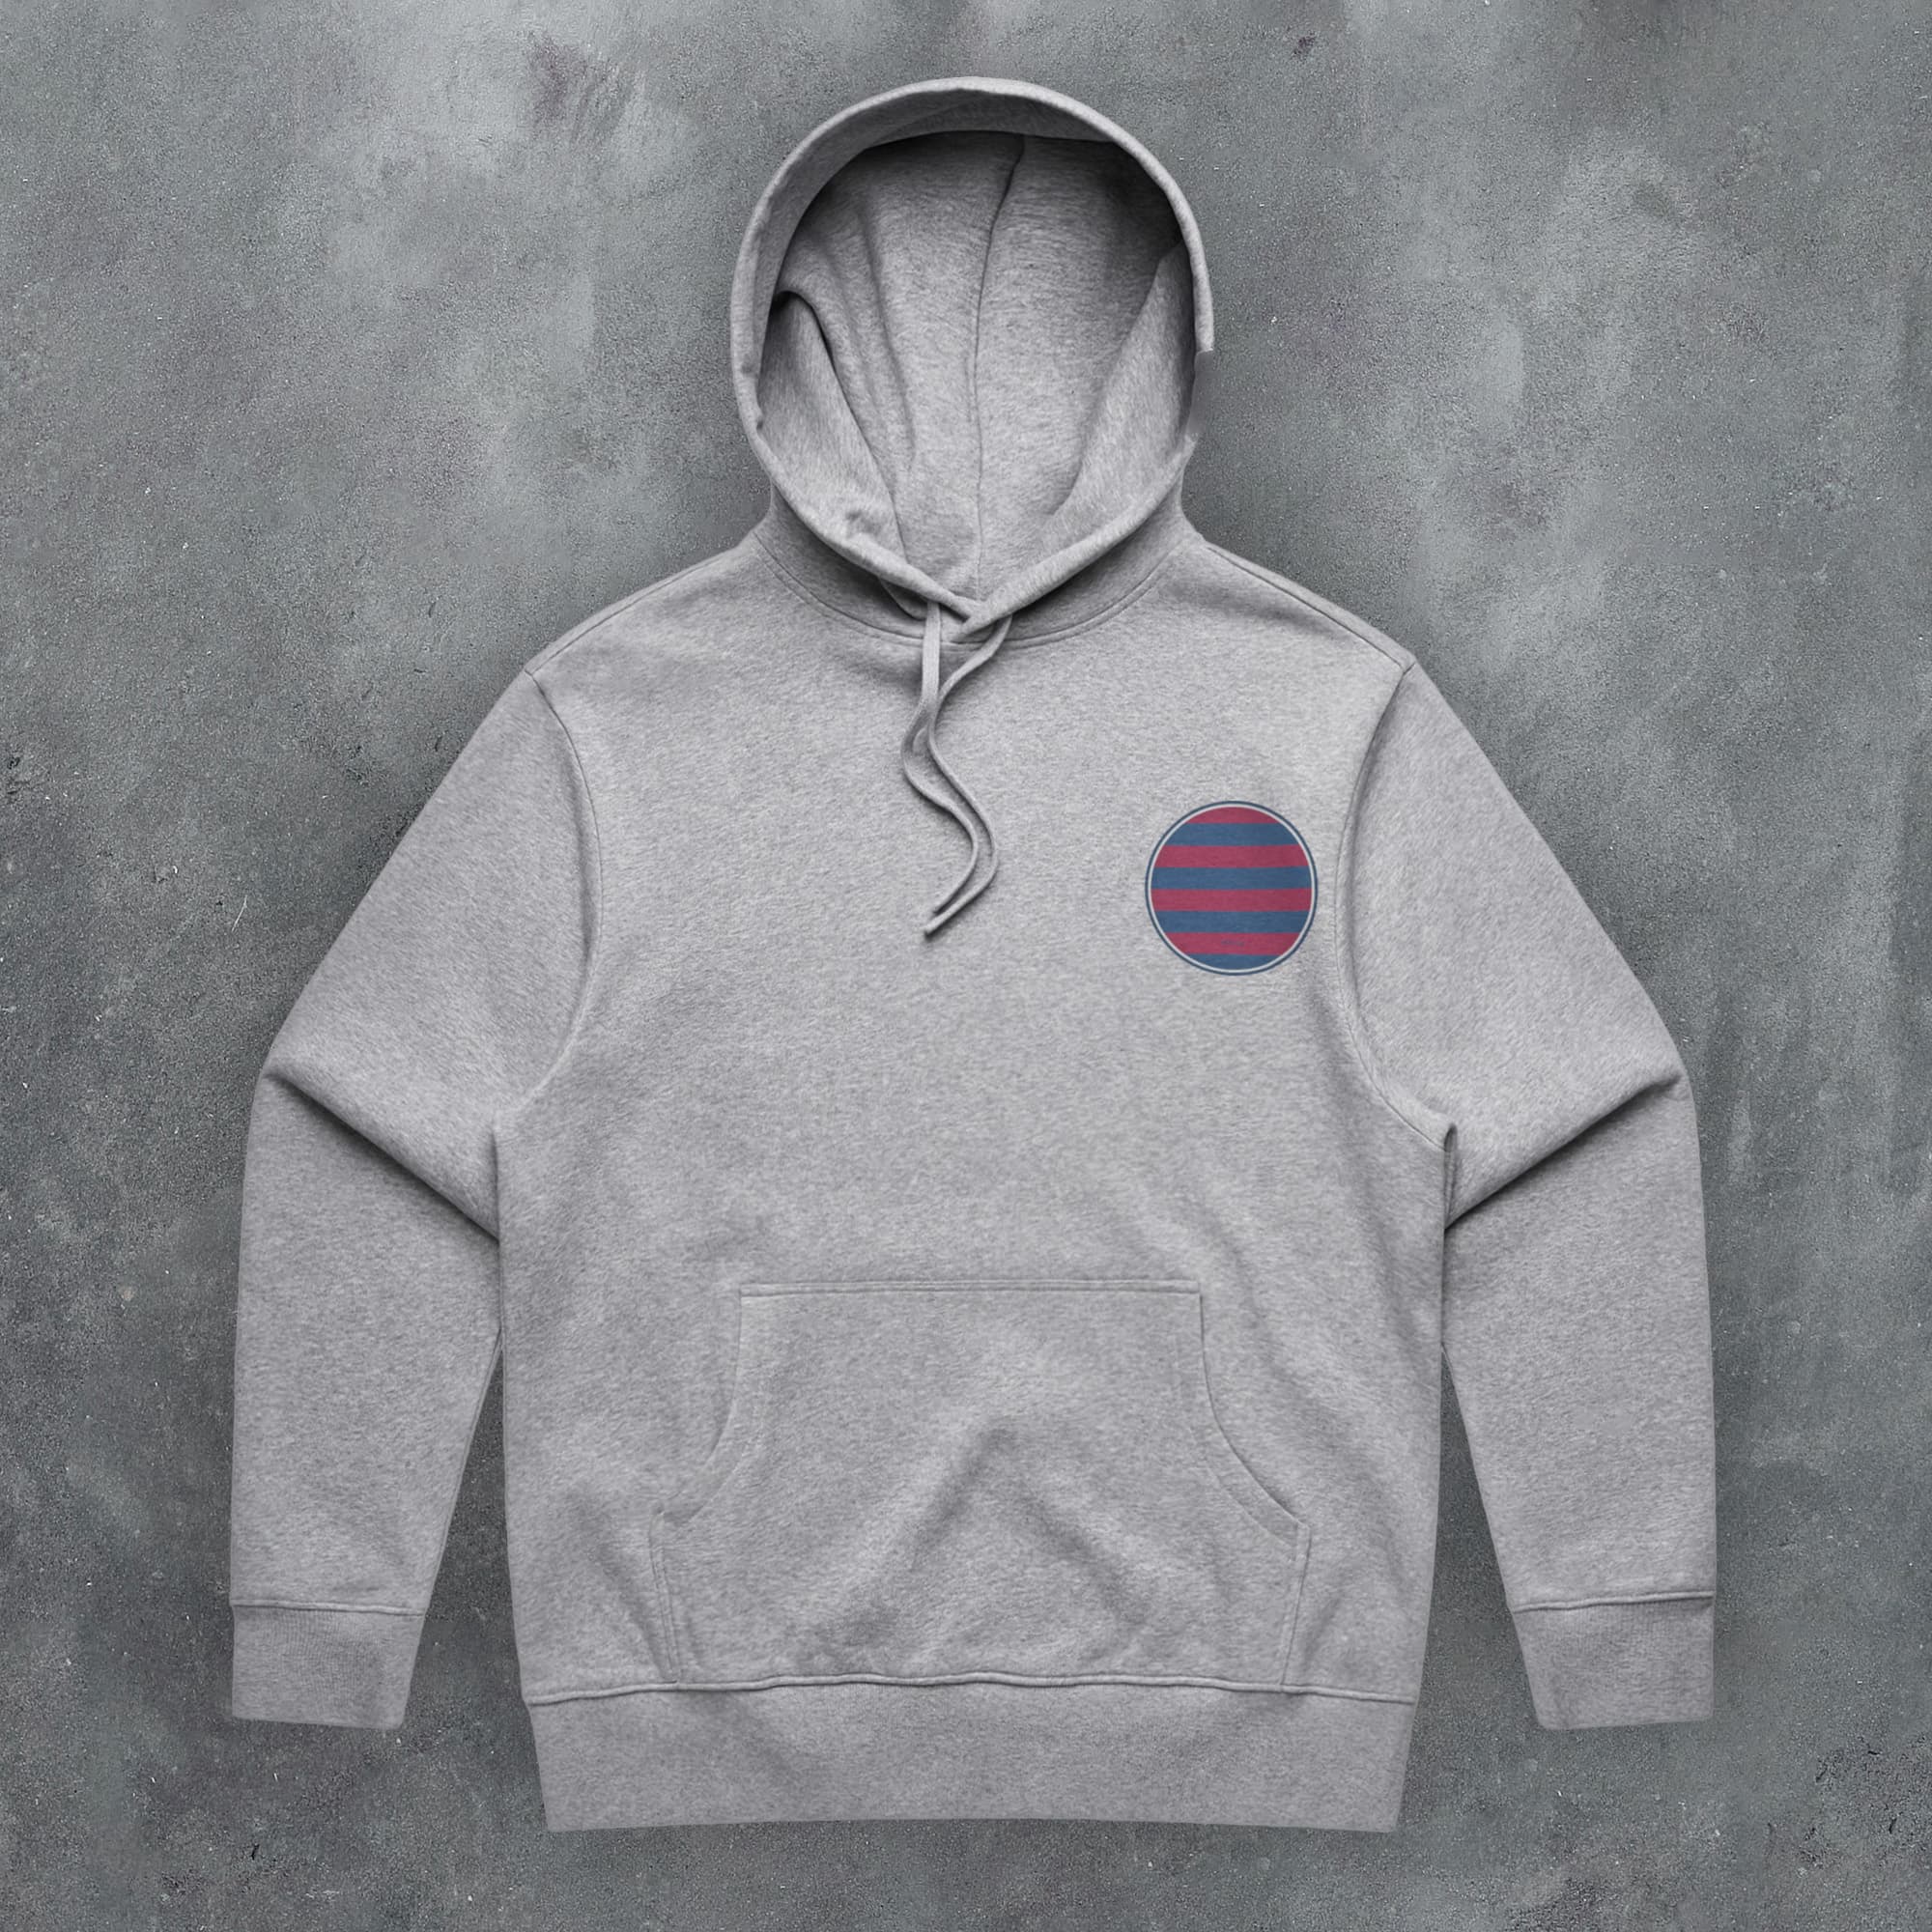 a grey hoodie with a red and blue circle on it